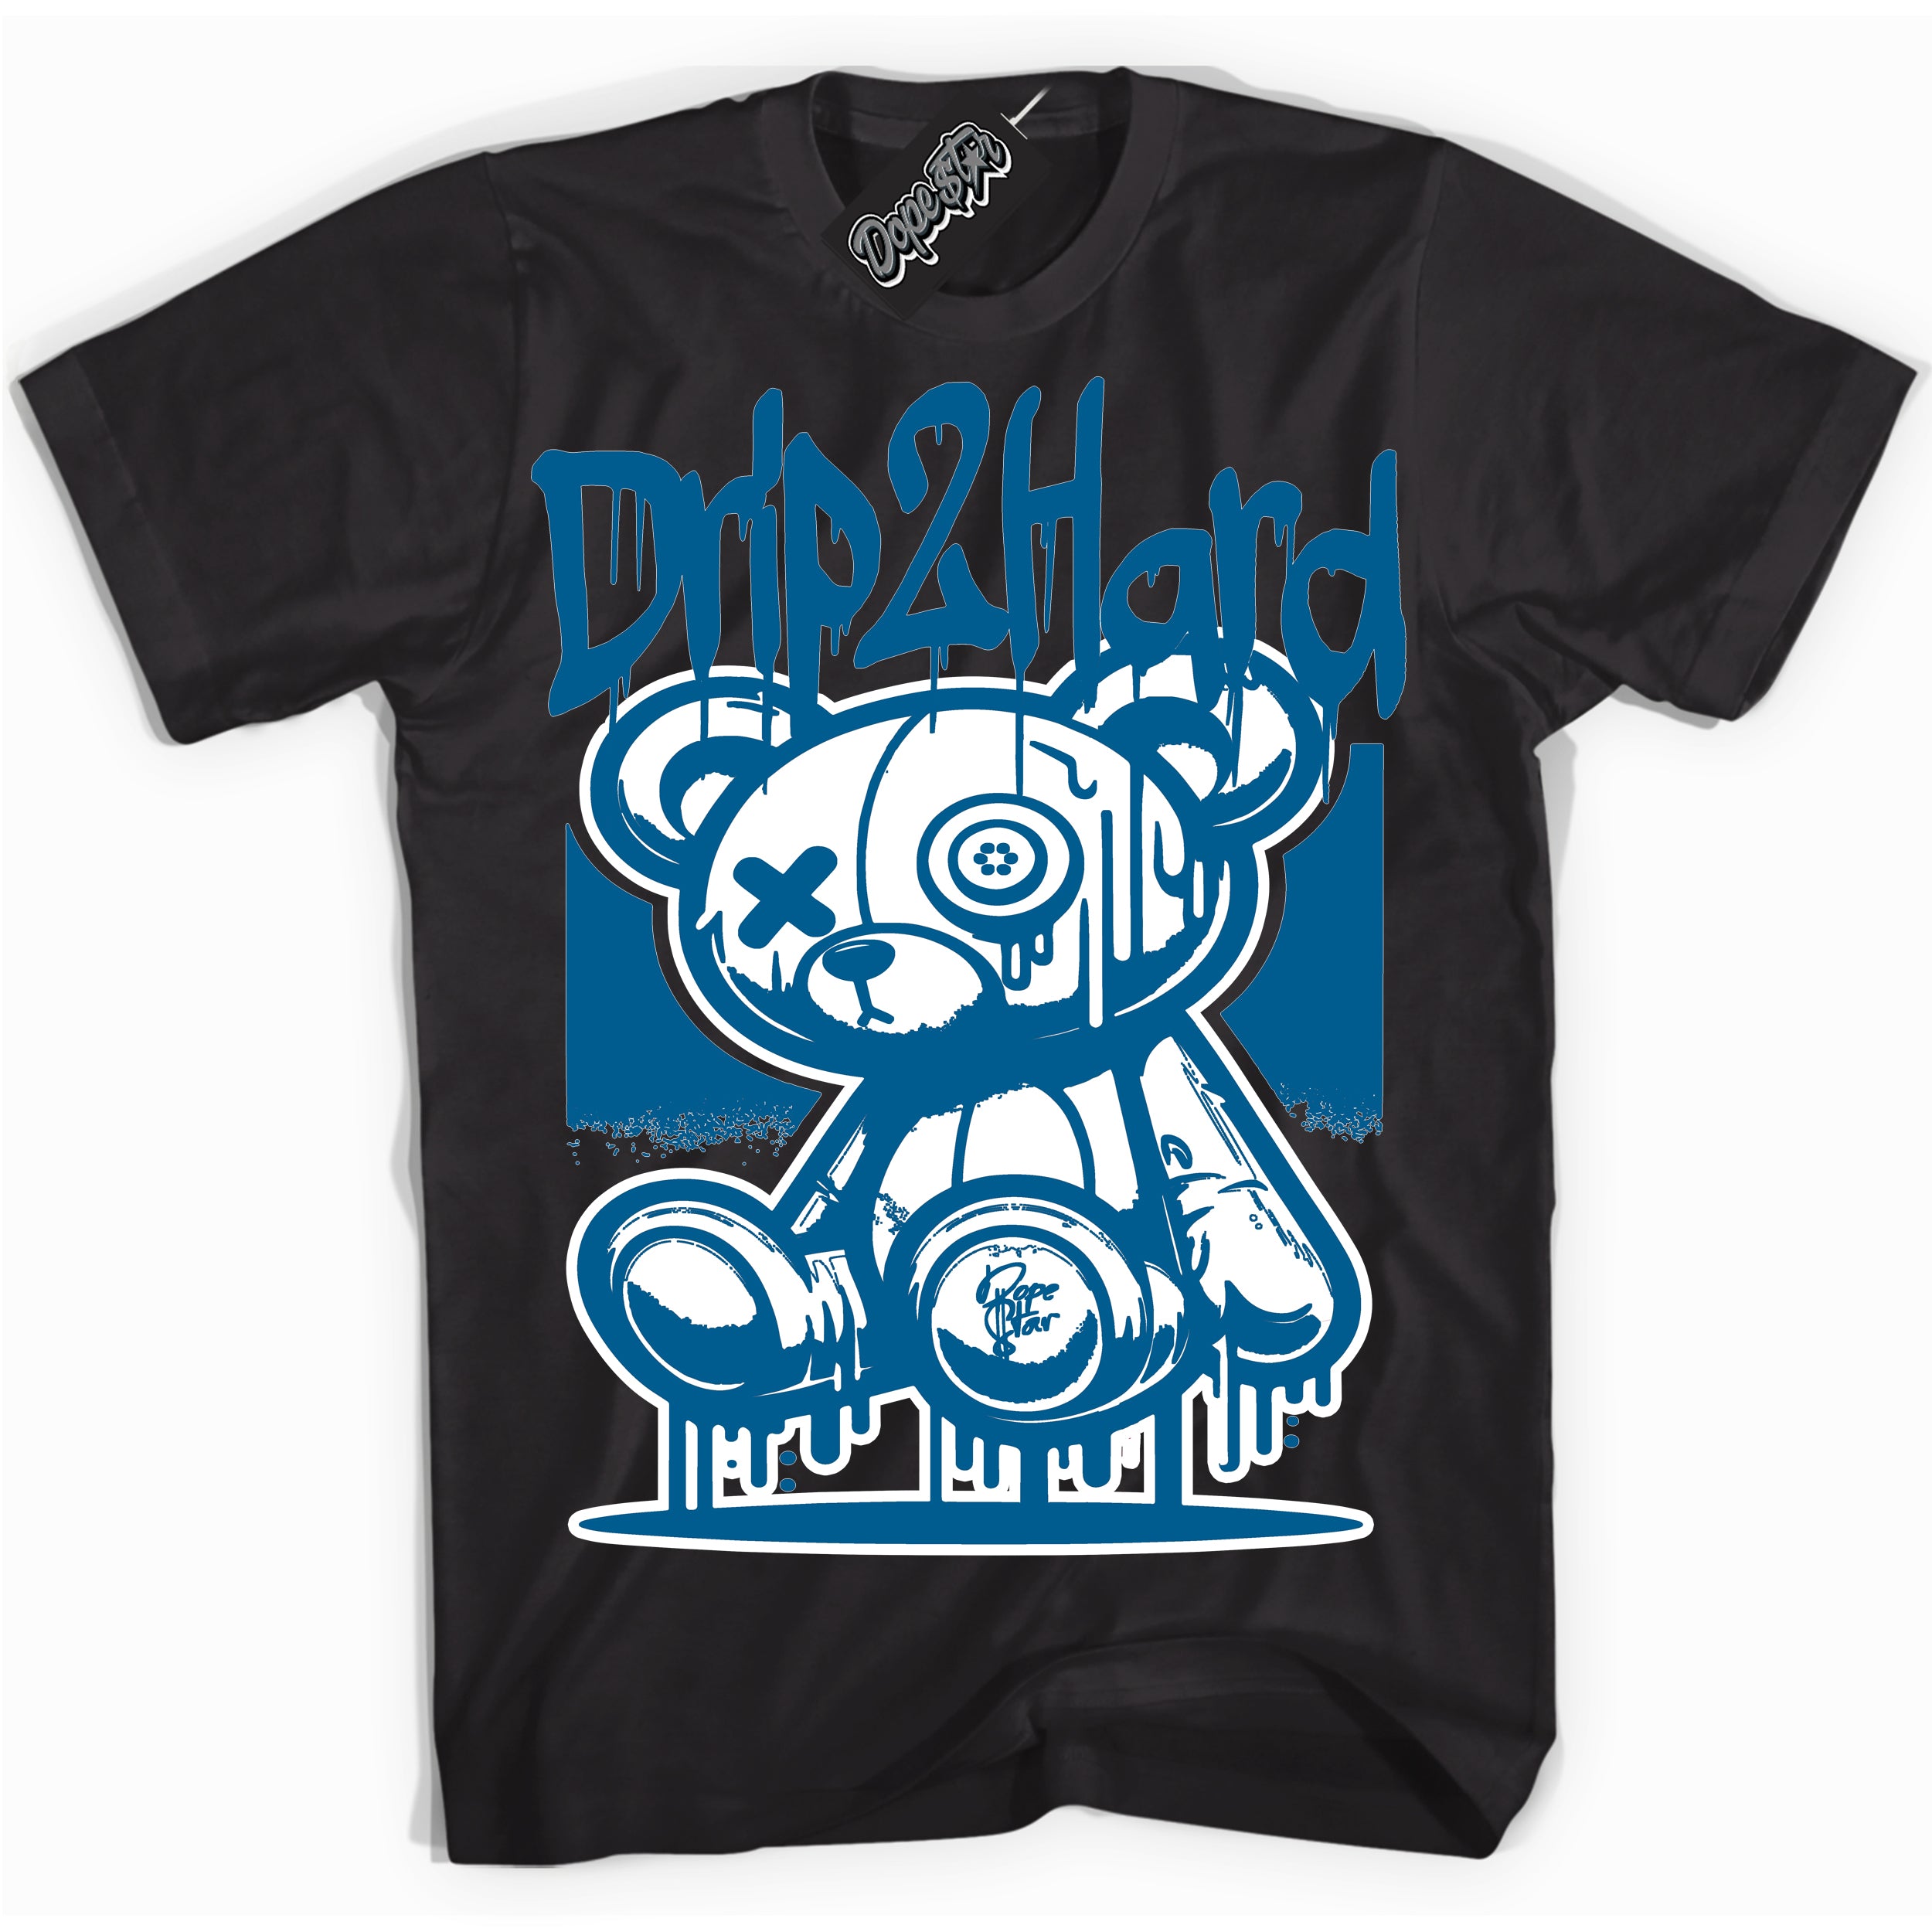 Cool Black graphic tee with “ Drip 2 Hard ” design, that perfectly matches Marina Blue 11s